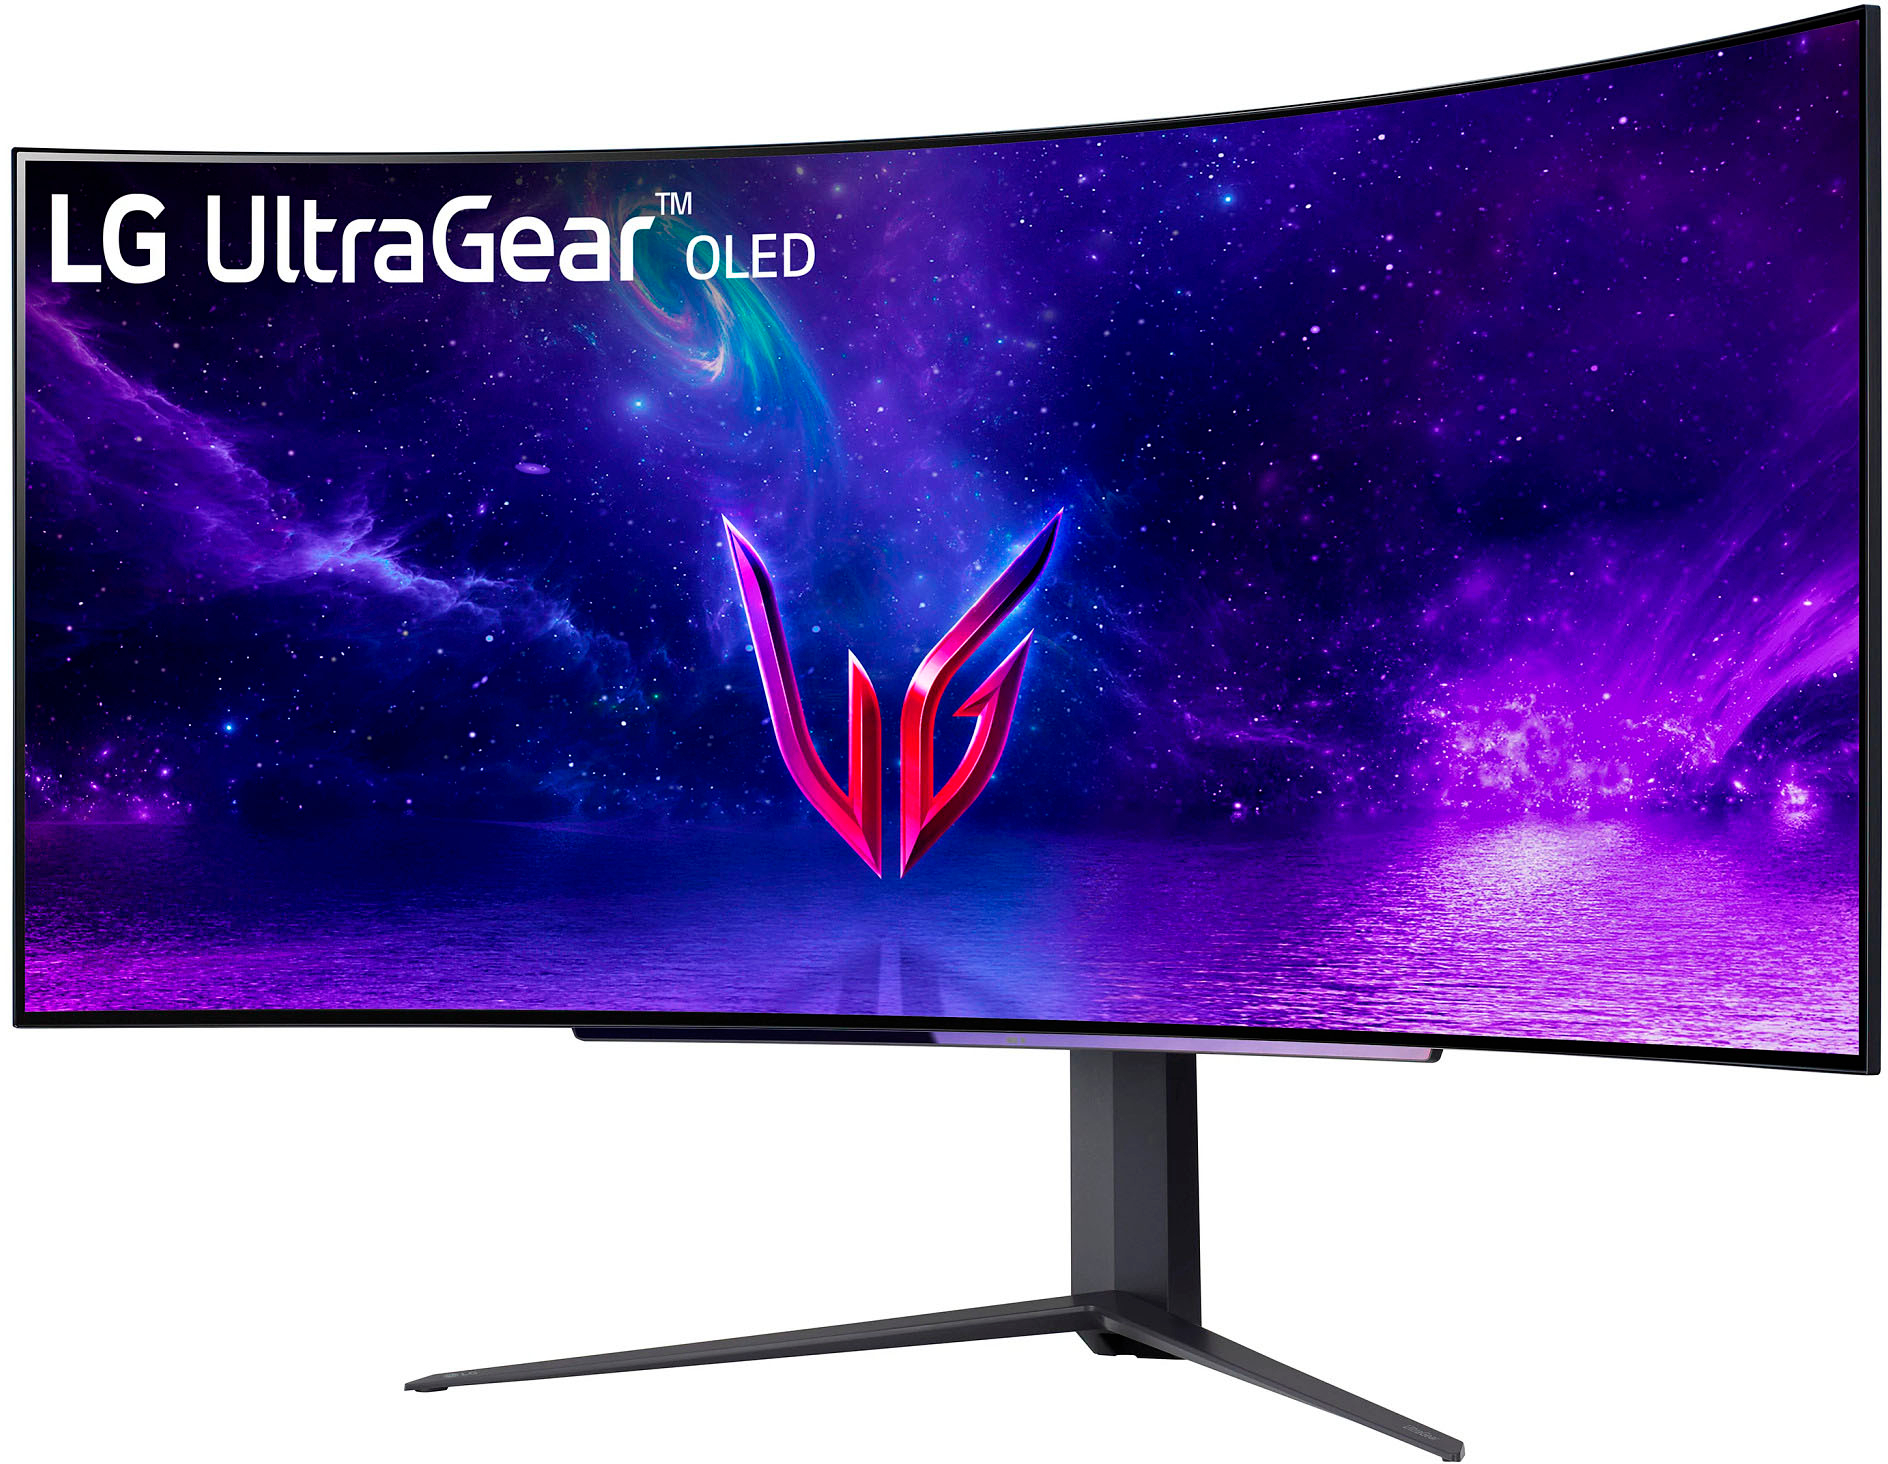 Left View: LG - UltraGear 45” OLED Curved WQHD 240Hz 0.03ms FreeSync and NVIDIA G-Sync Compatible Gaming Monitor with HDR10 - Black